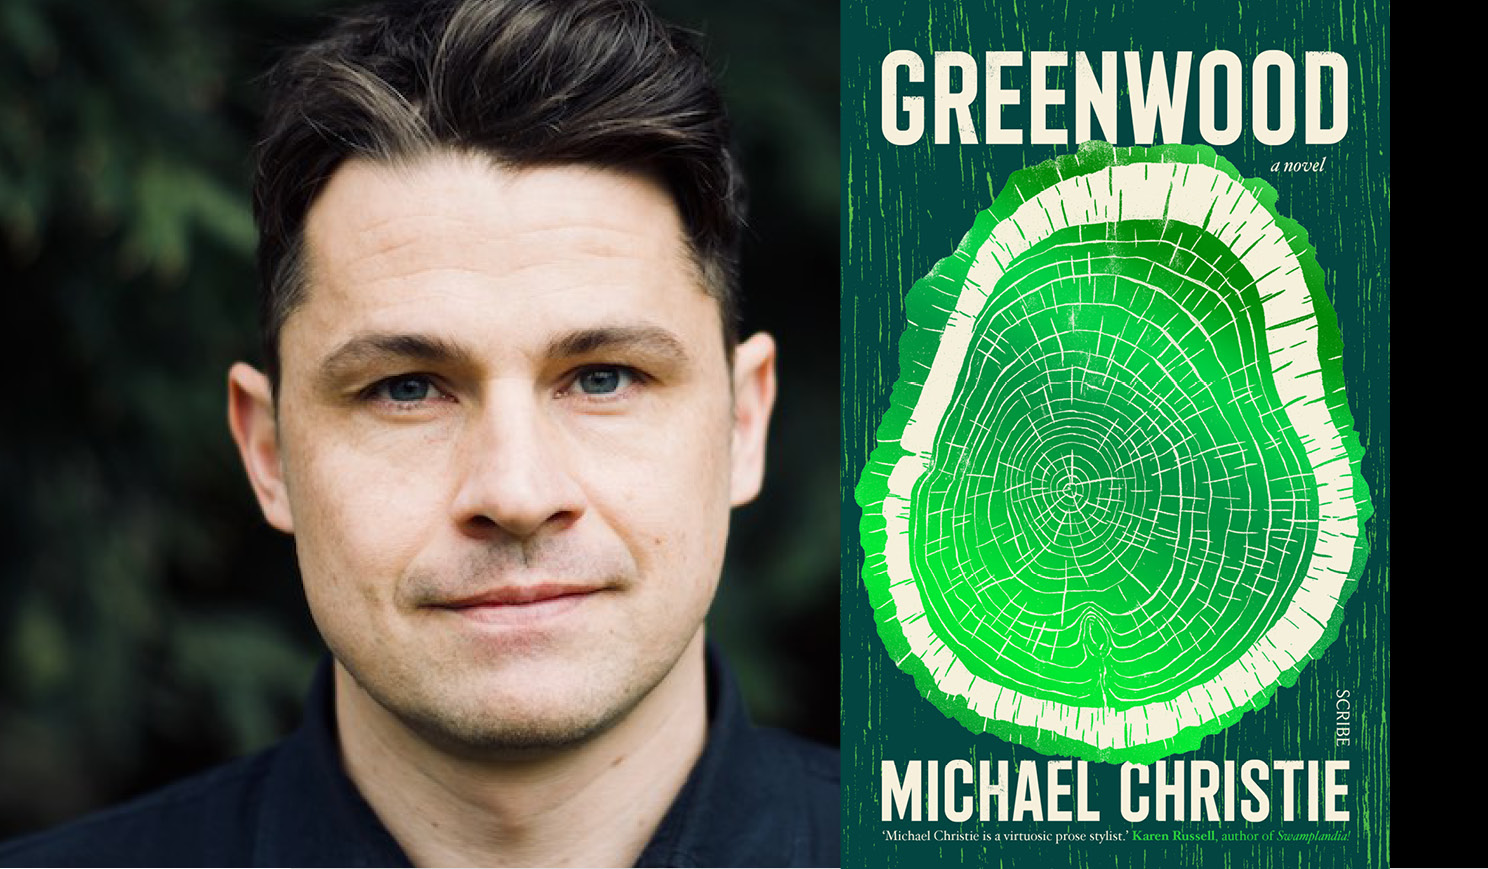 Michael Christie's headshot alongside the cover of his book Greenwood